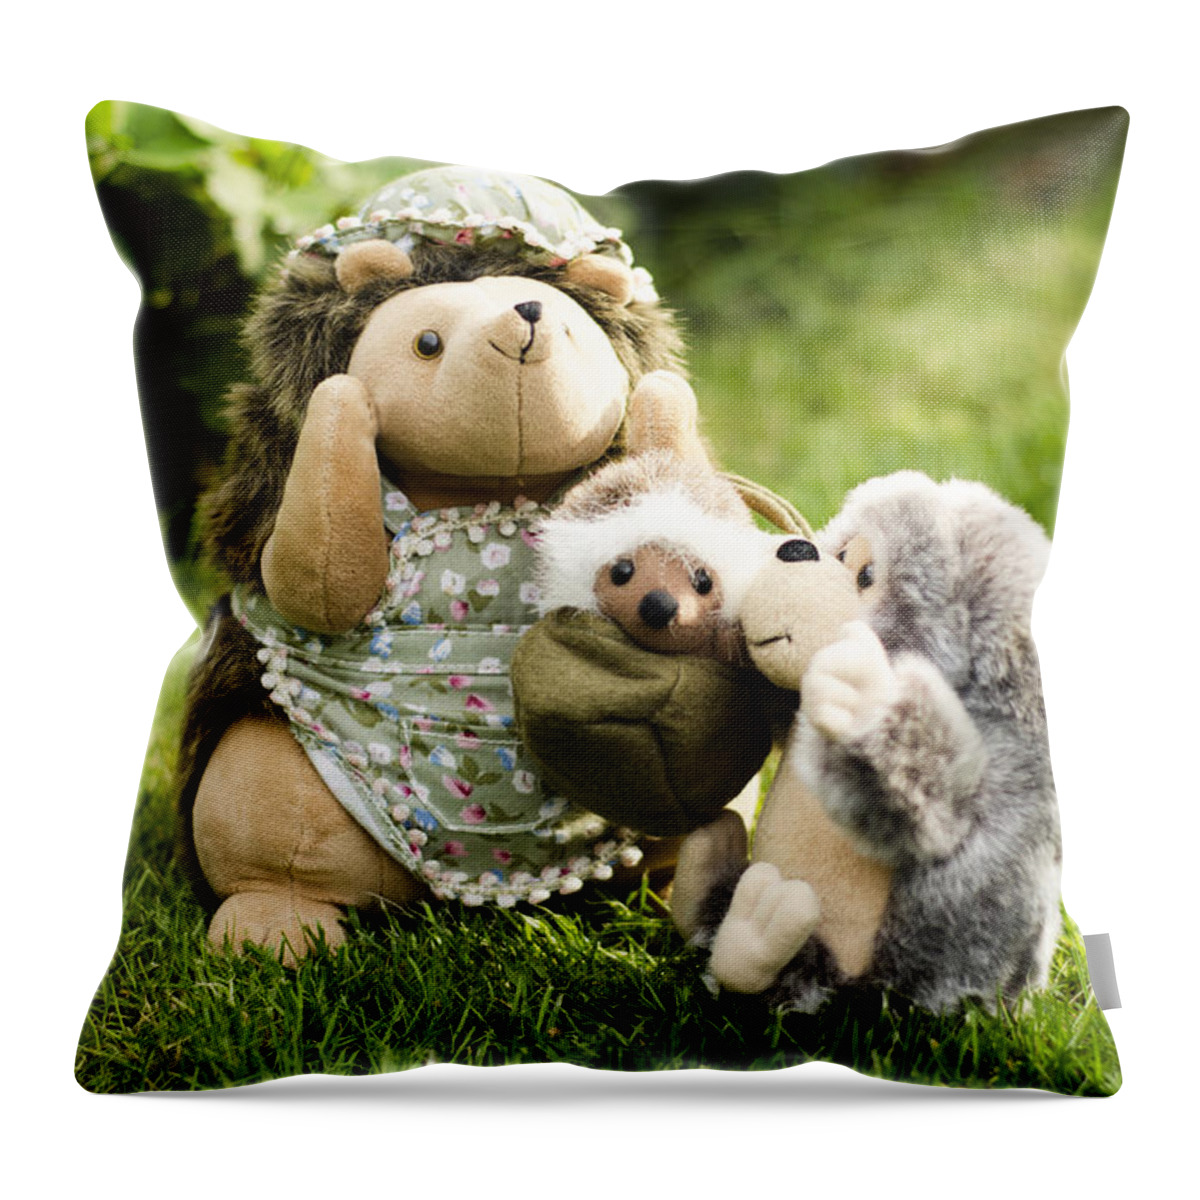 Mrs. Hedgie Throw Pillow featuring the photograph Welcome Brother by Spikey Mouse Photography